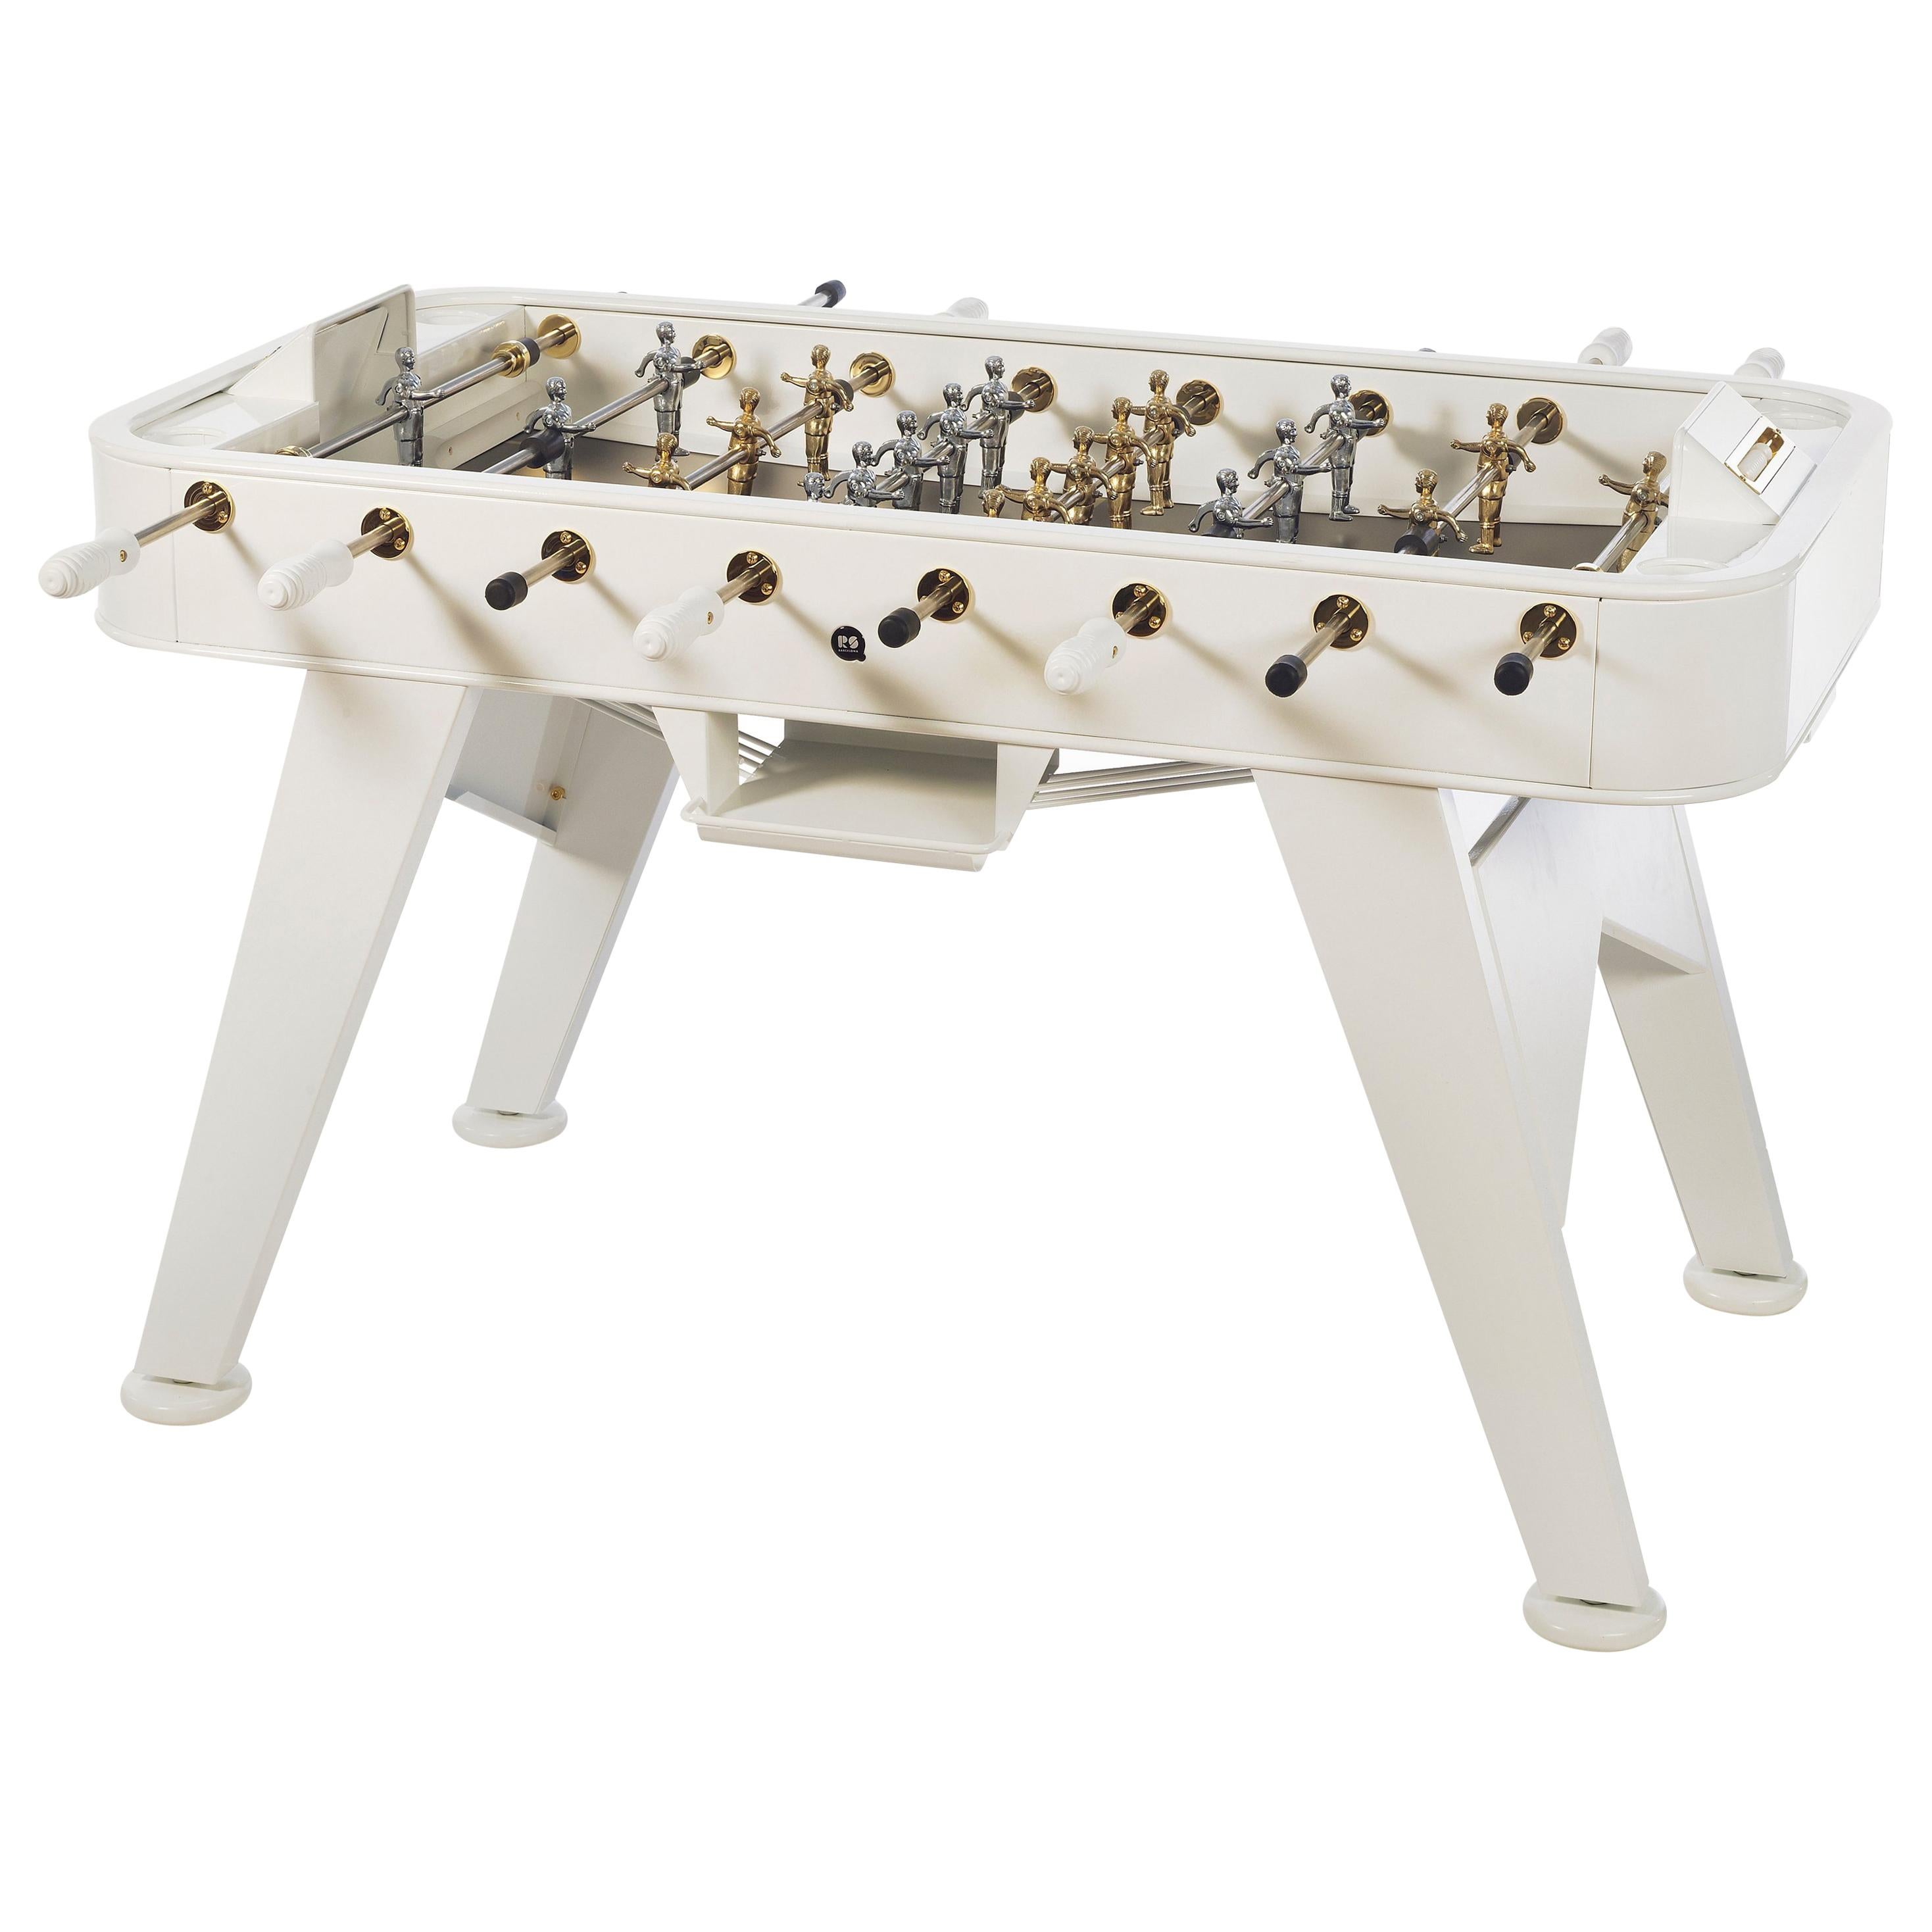 RS Barcelona RS2 Gold Edition Football Table in White by Rafael Rodriguez For Sale